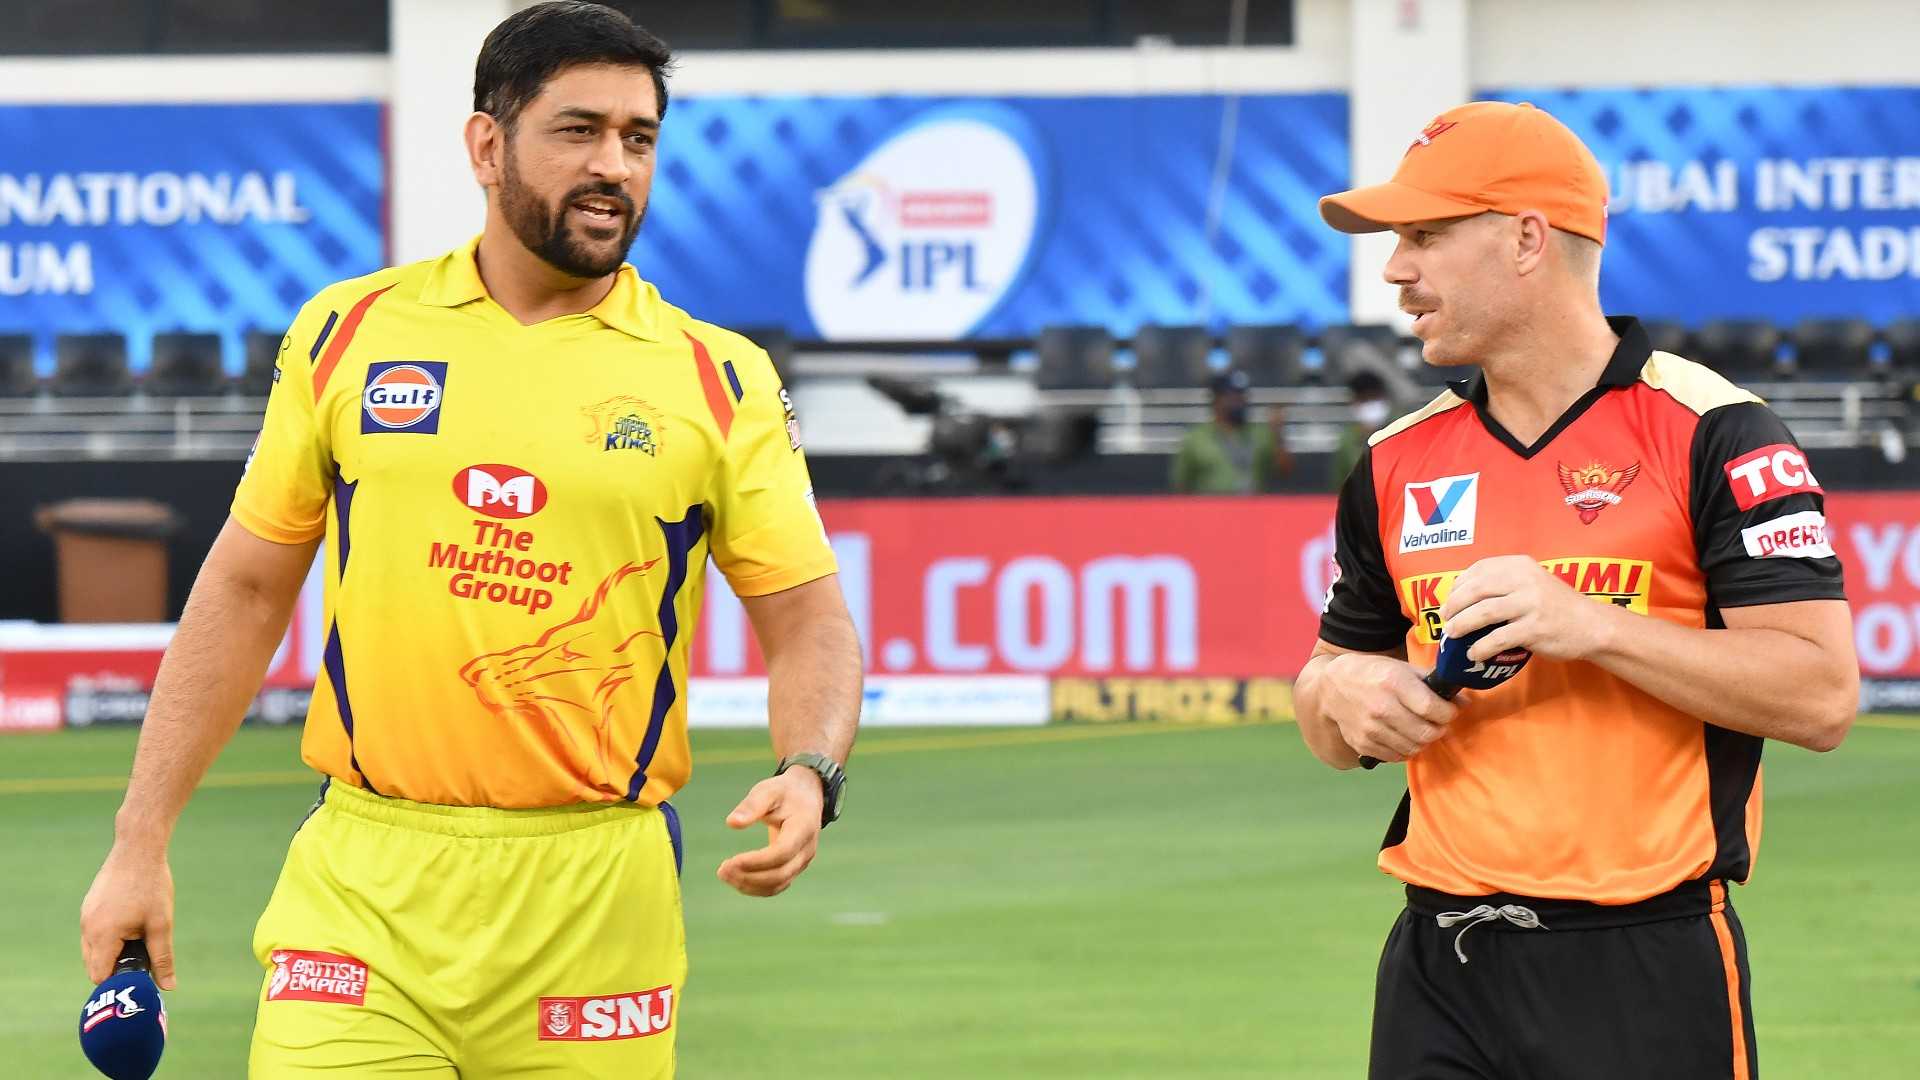 MS Dhoni and David Warner in a file photo. (Image Credit: Twitter)